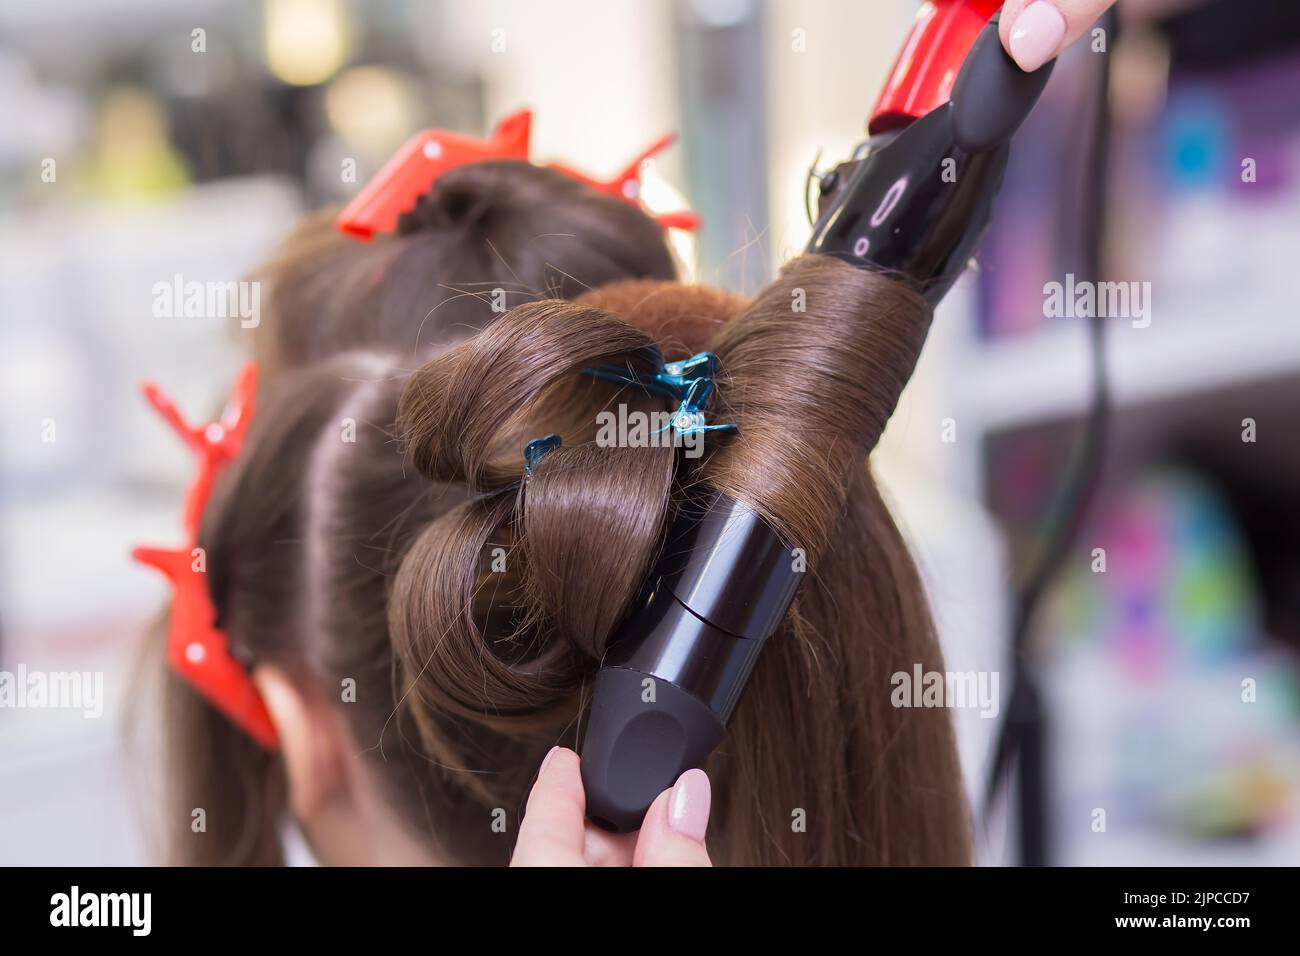 Close-up hot tongs curl a strand of hair on a woman's head. The hairdresser makes a hairstyle for a young woman. Barber shop, business concept. Beauty salon, hair care. Stock Photo